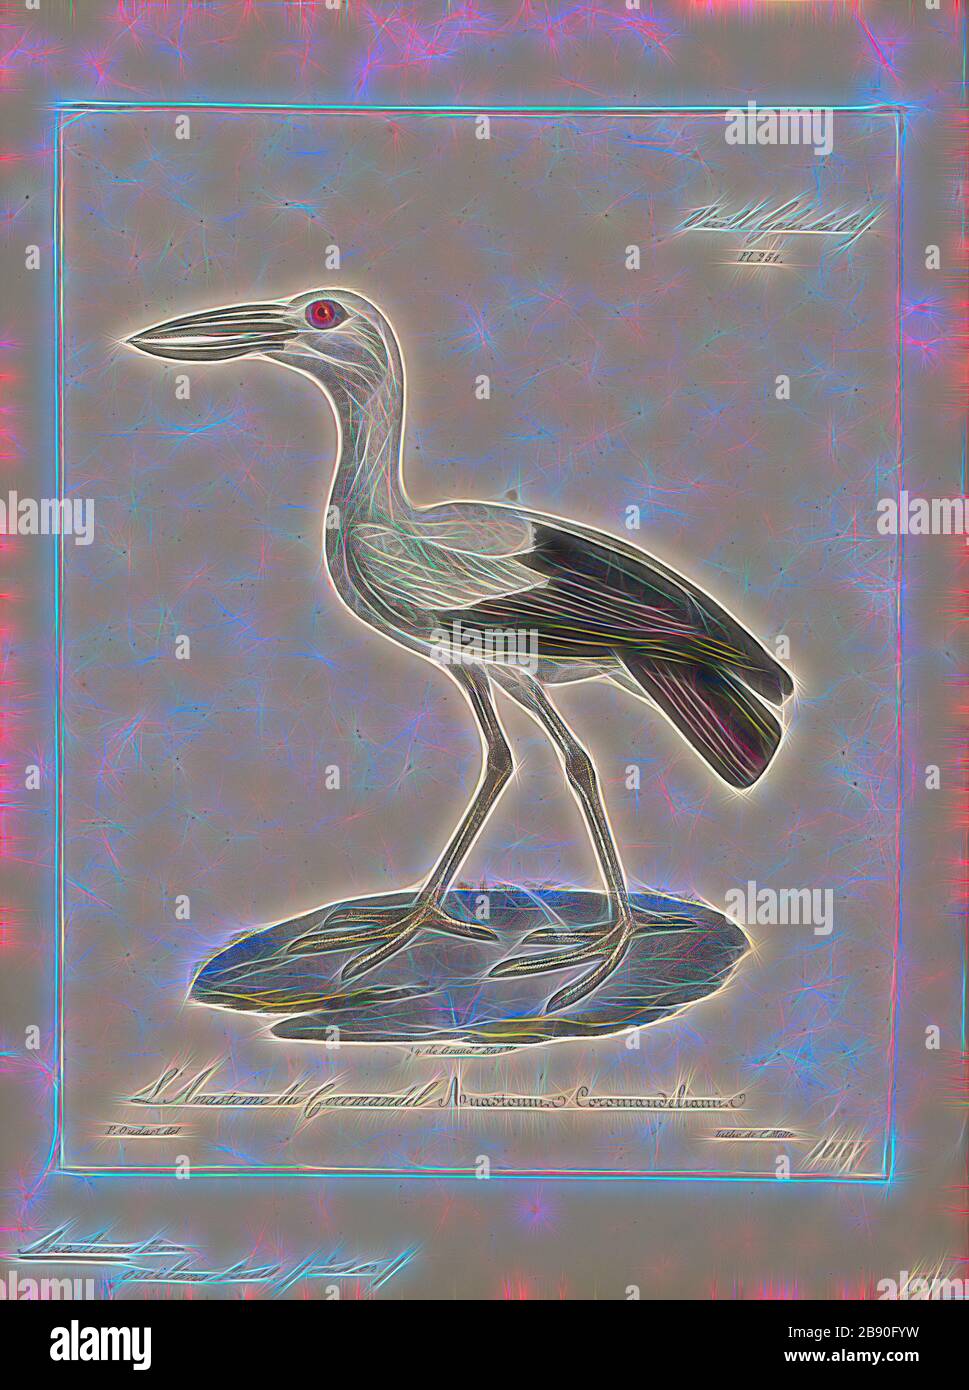 Anastomus oscitans, Print, The Asian openbill or Asian openbill stork (Anastomus oscitans) is a large wading bird in the stork family Ciconiidae. This distinctive stork is found mainly in the Indian subcontinent and Southeast Asia. It is greyish or white with glossy black wings and tail and the adults have a gap between the arched upper mandible and recurved lower mandible. Young birds are born without this gap which is thought to be an adaptation that aids in the handling of snails, their main prey. Although resident within their range, they make long distance movements in response to weather Stock Photo